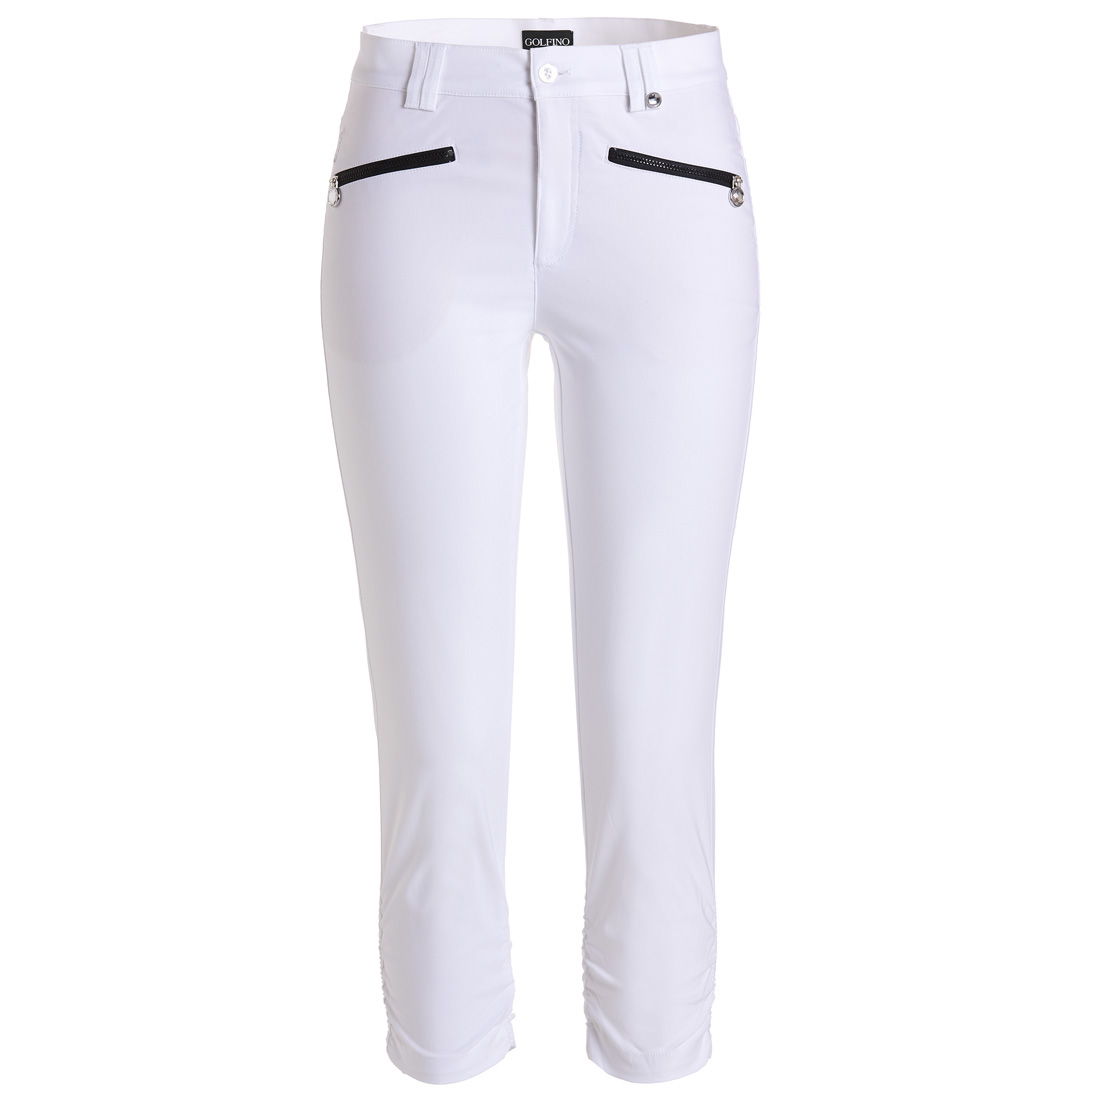 Ladies' Capri pants made from water-repellent stretch material with sun protection function